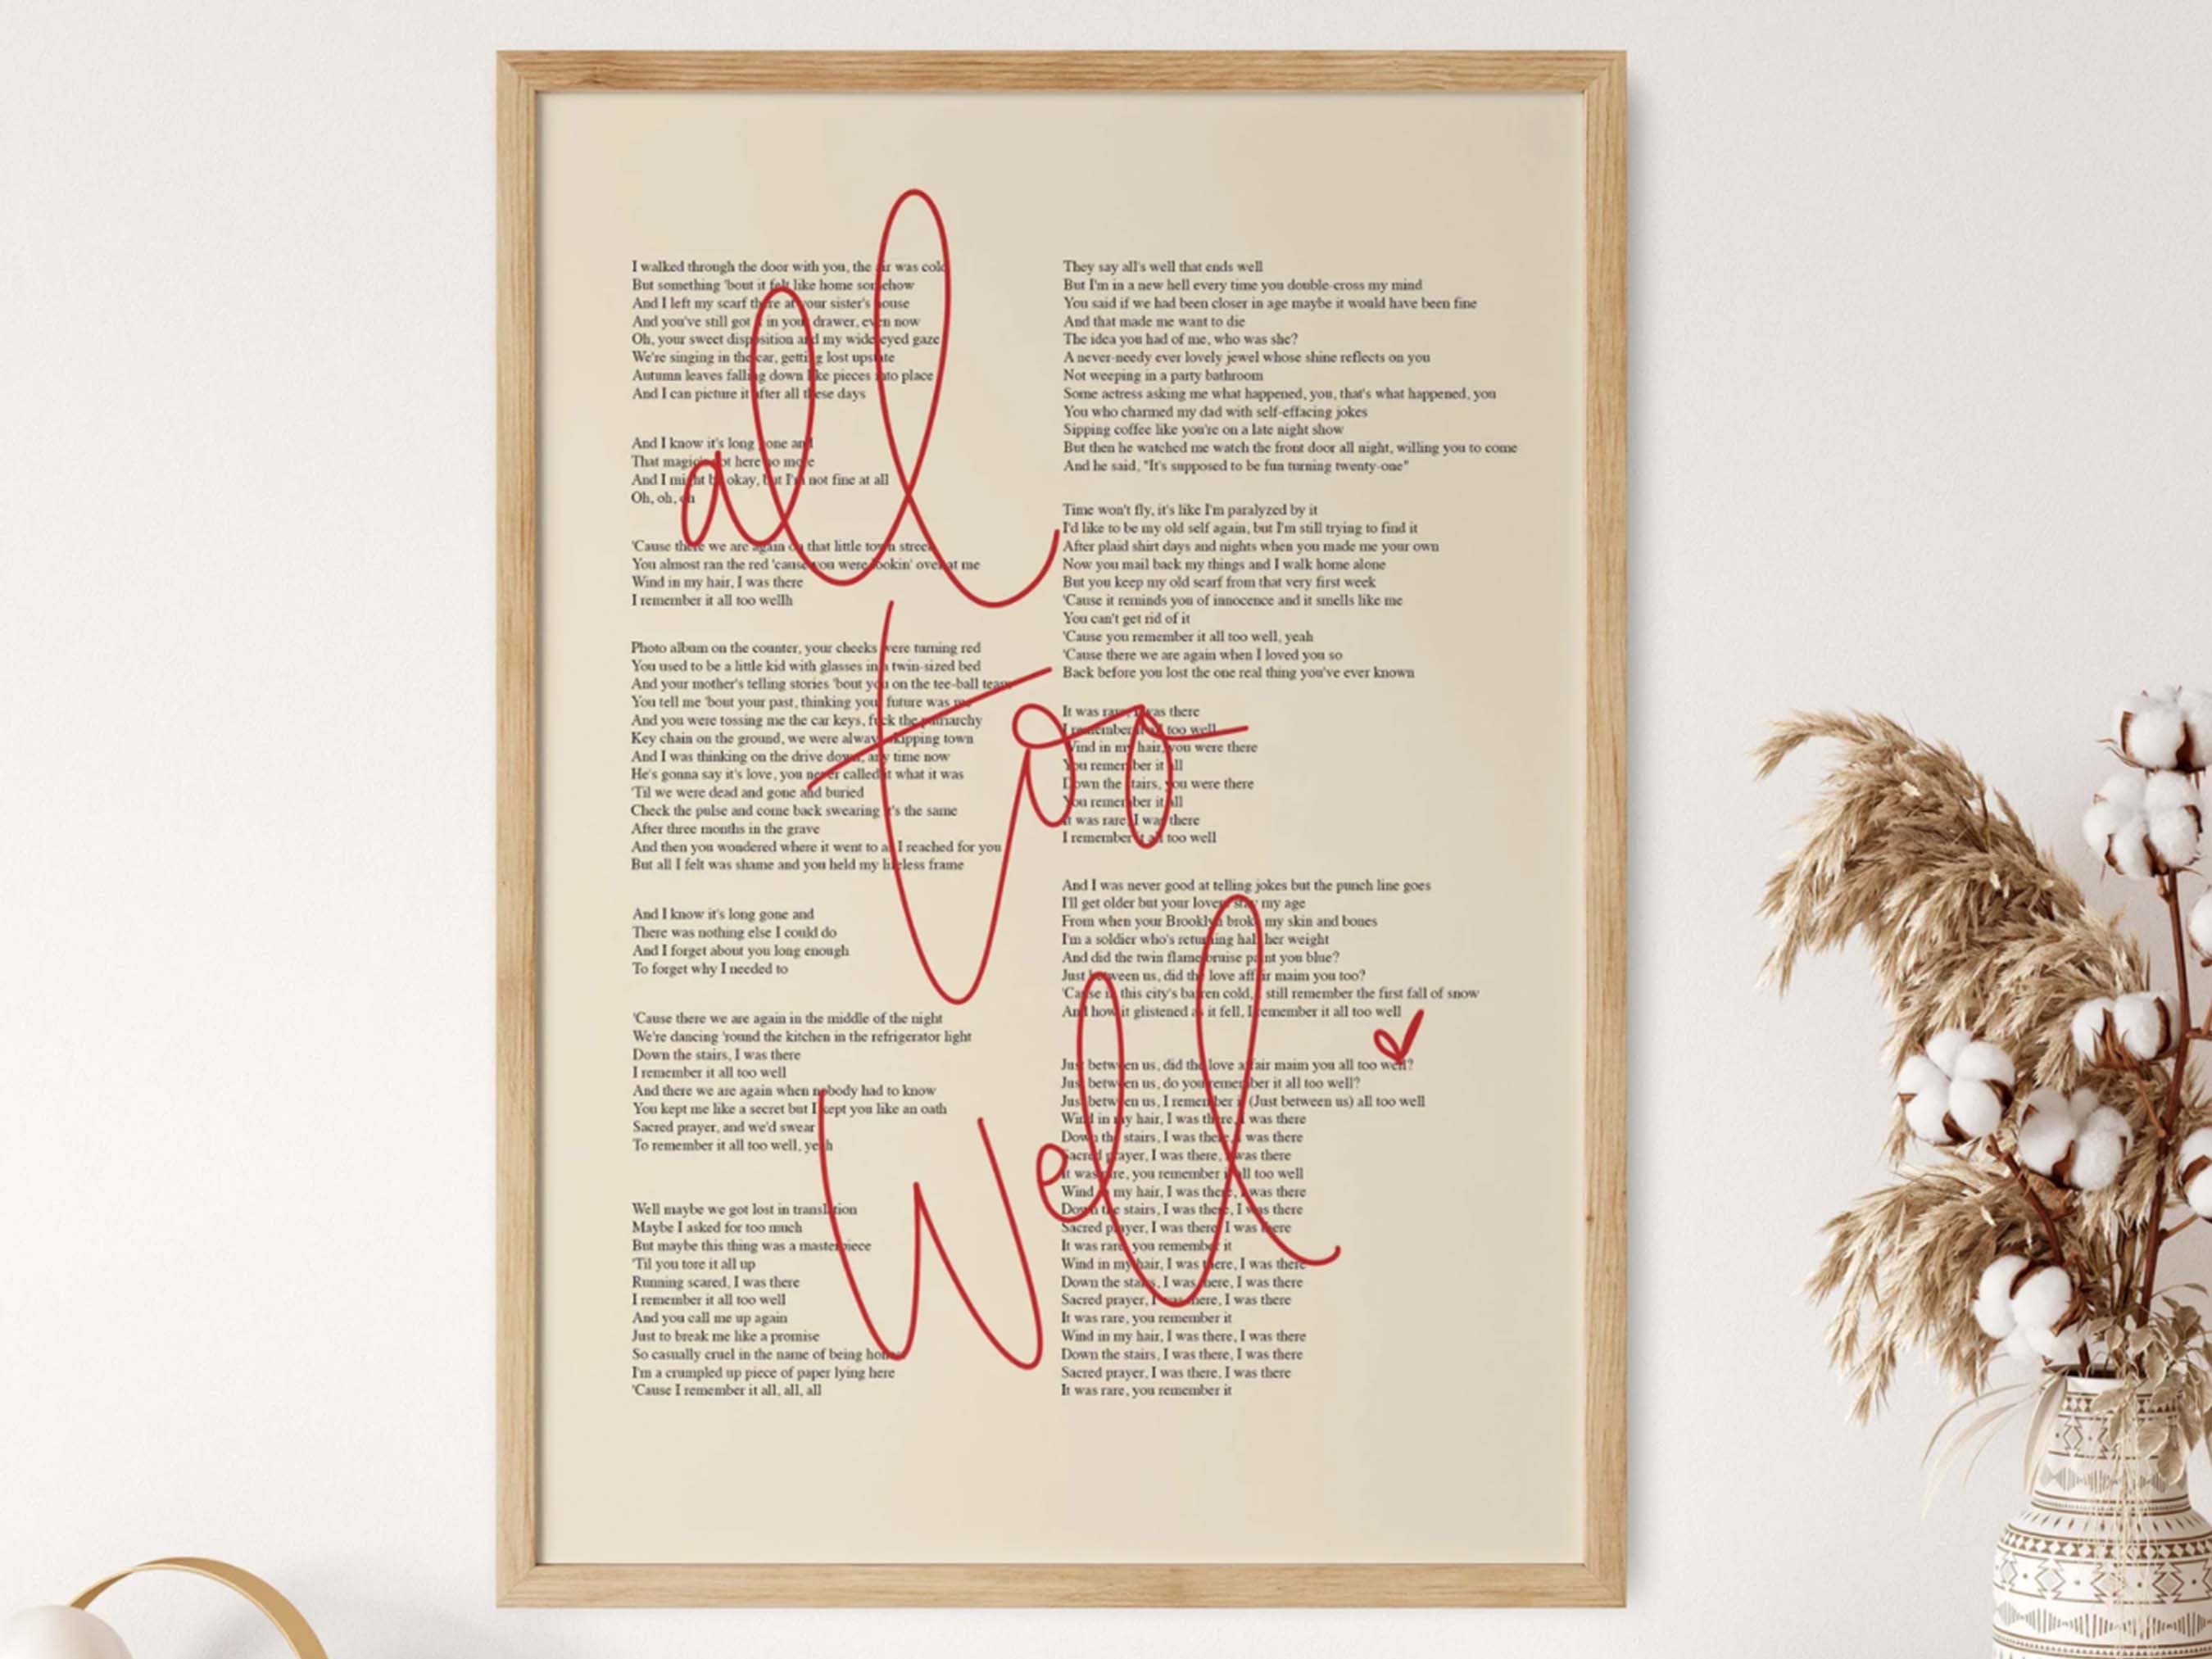 Taylor Swift Lyrics. Bedroom Wall Art. Song Lyric Print. Lover Lyrics.  Above Bed Decor. All's Well That Ends Well to End up With You -  Denmark